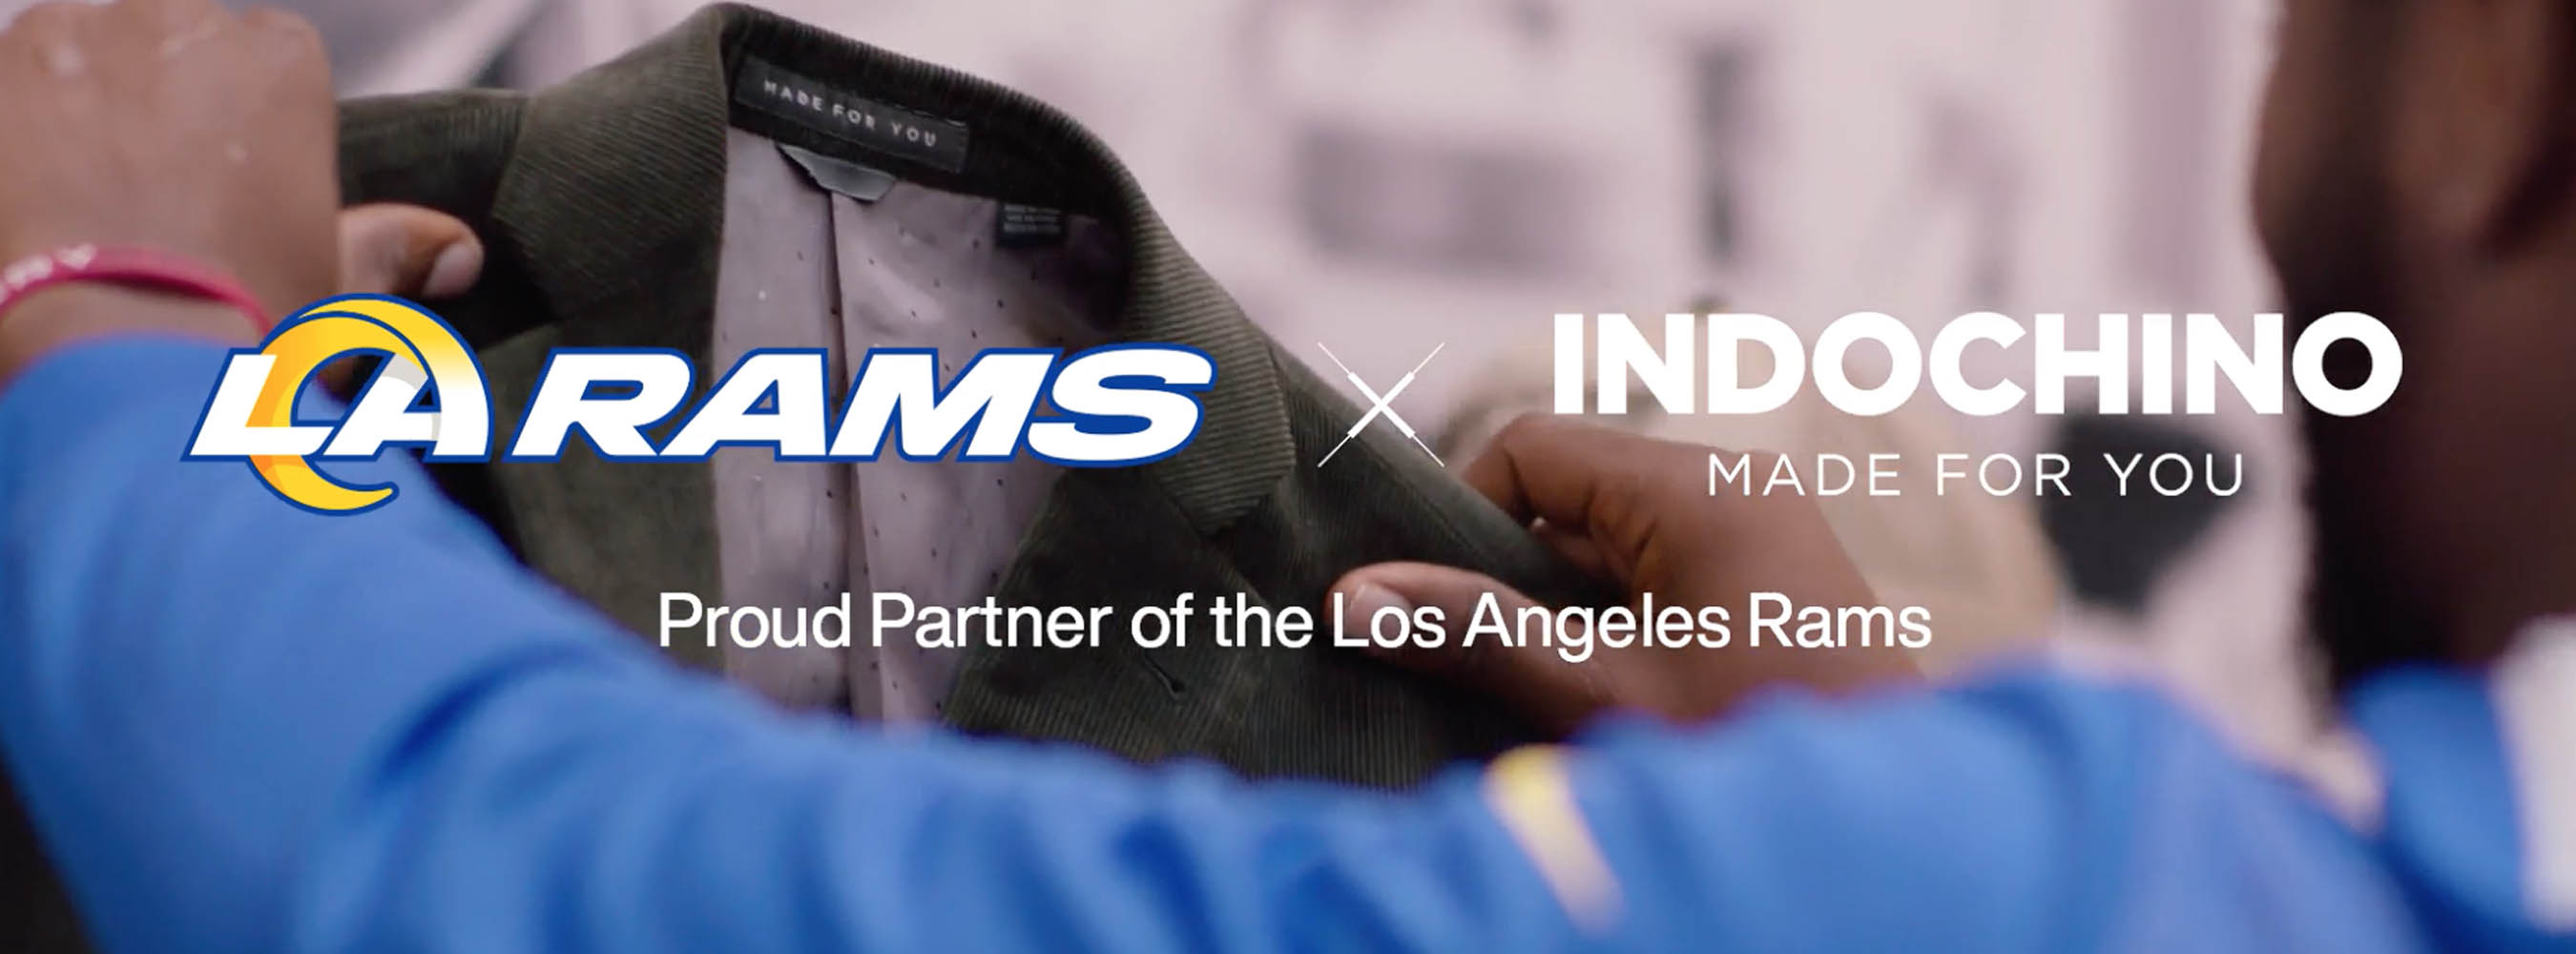 Play Video: INDOCHINO Named Proud Partner of Los Angeles Rams